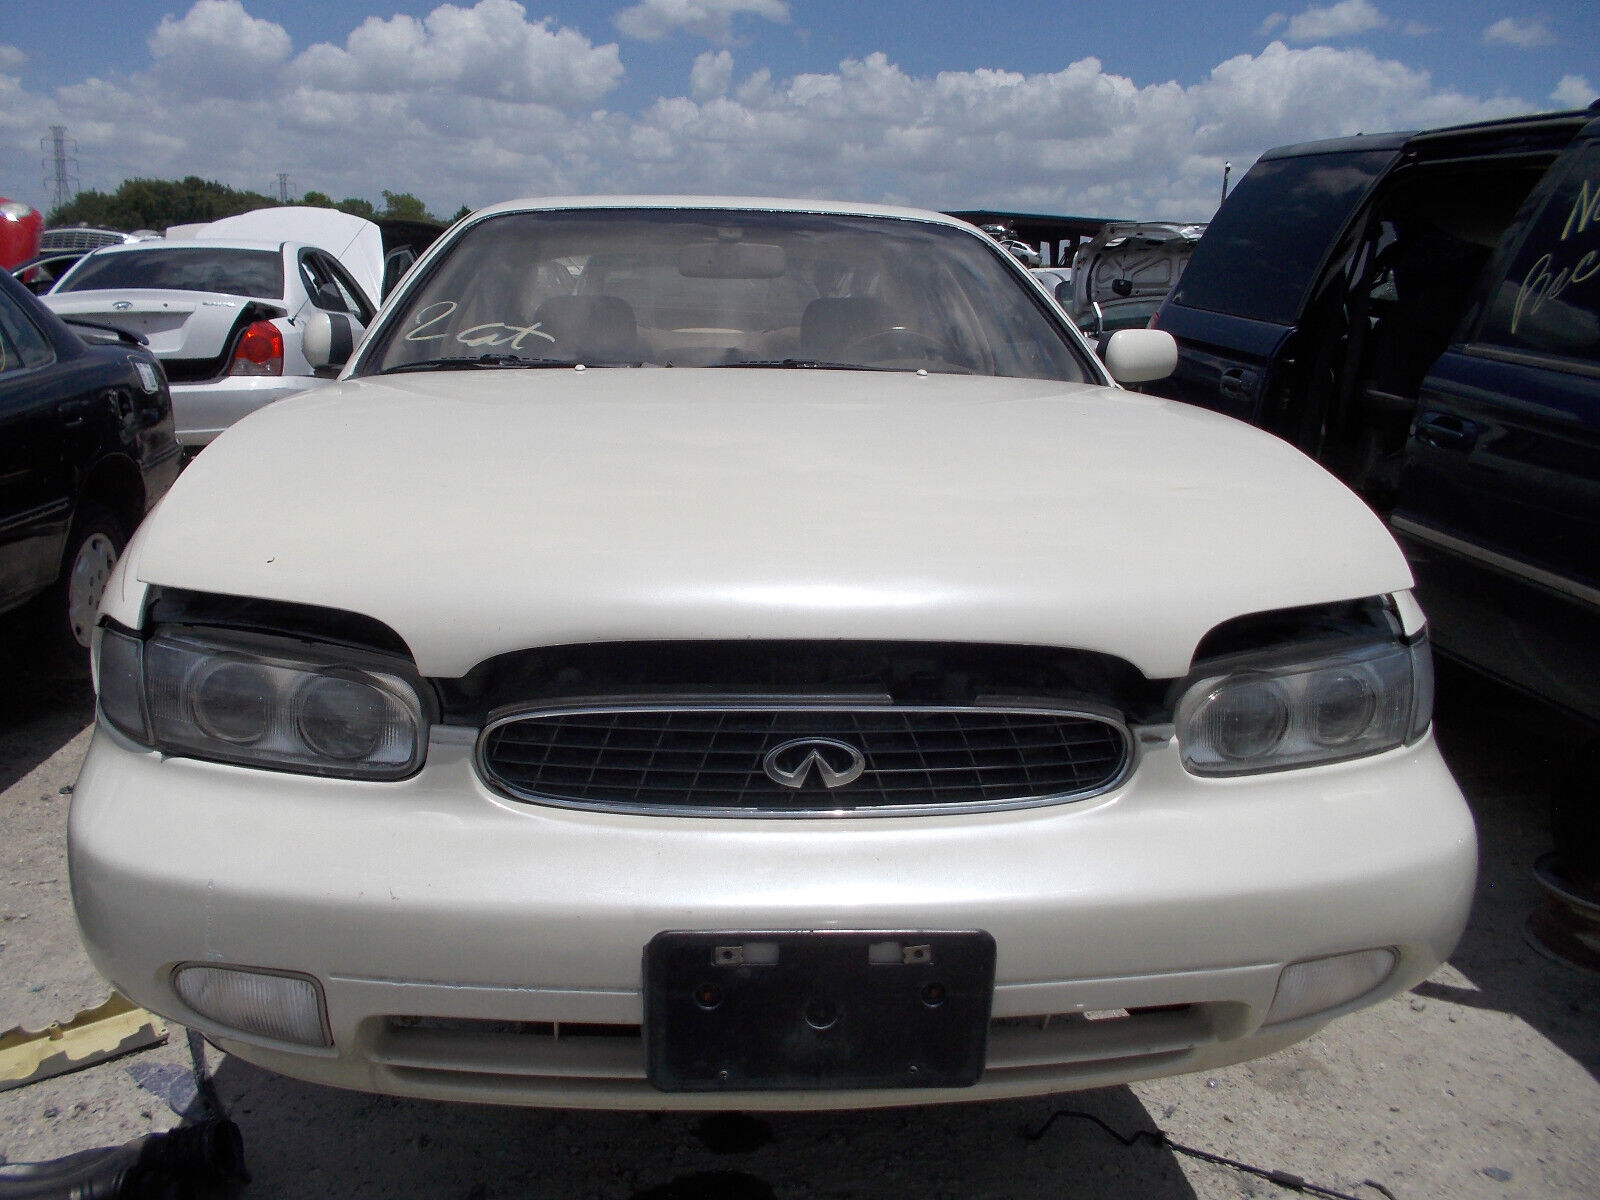 INFINITI J30 PARTING OUT 1997 | eBay